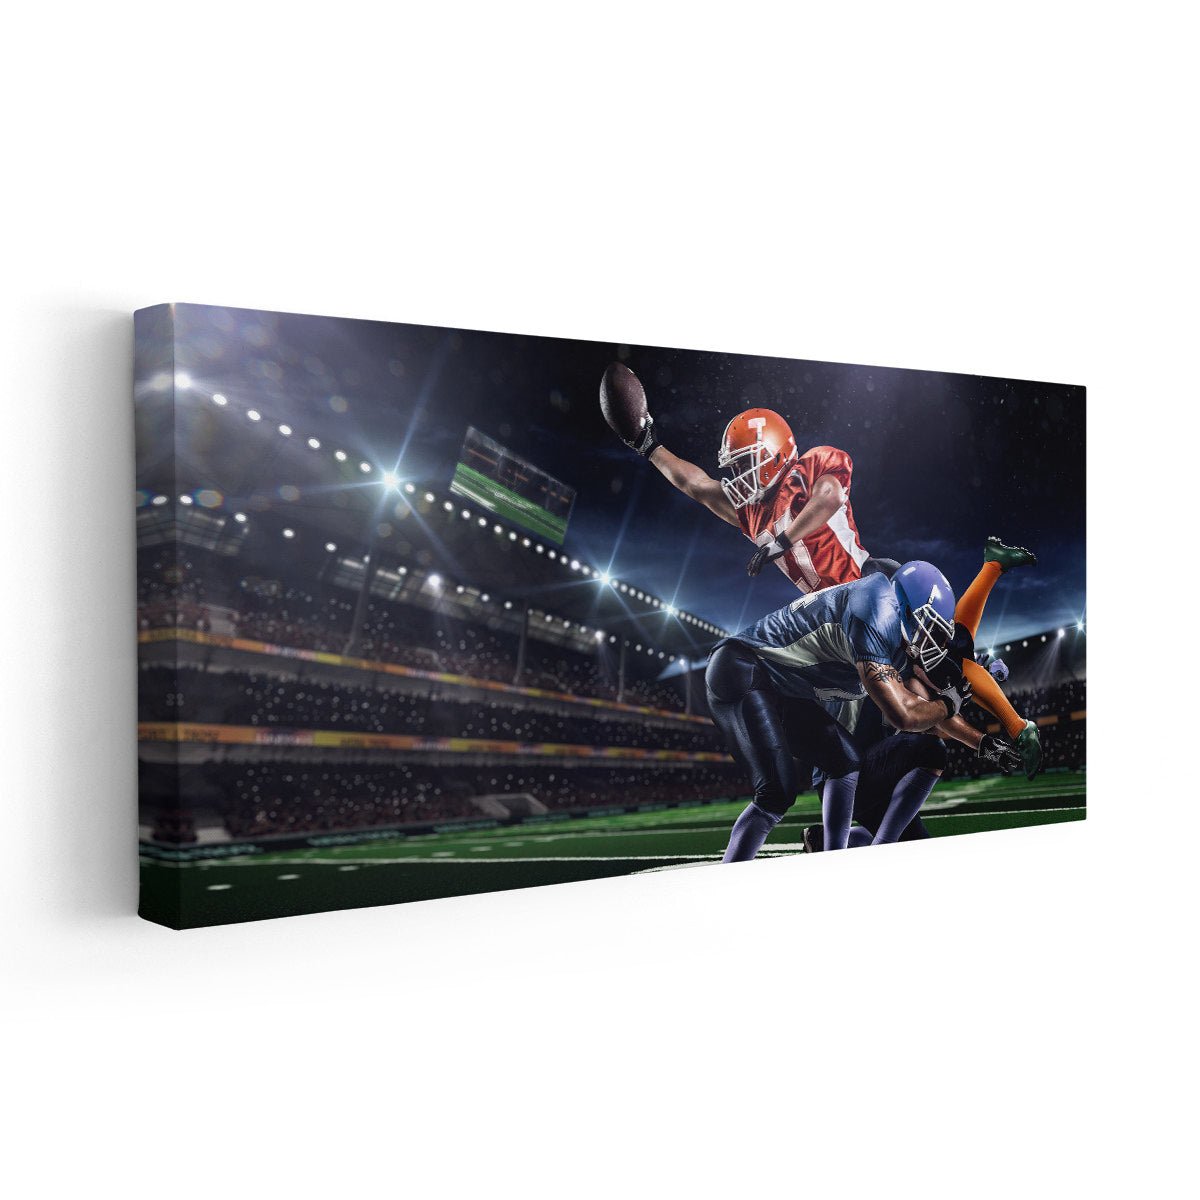 Football Players In Action Canvas Wall Art